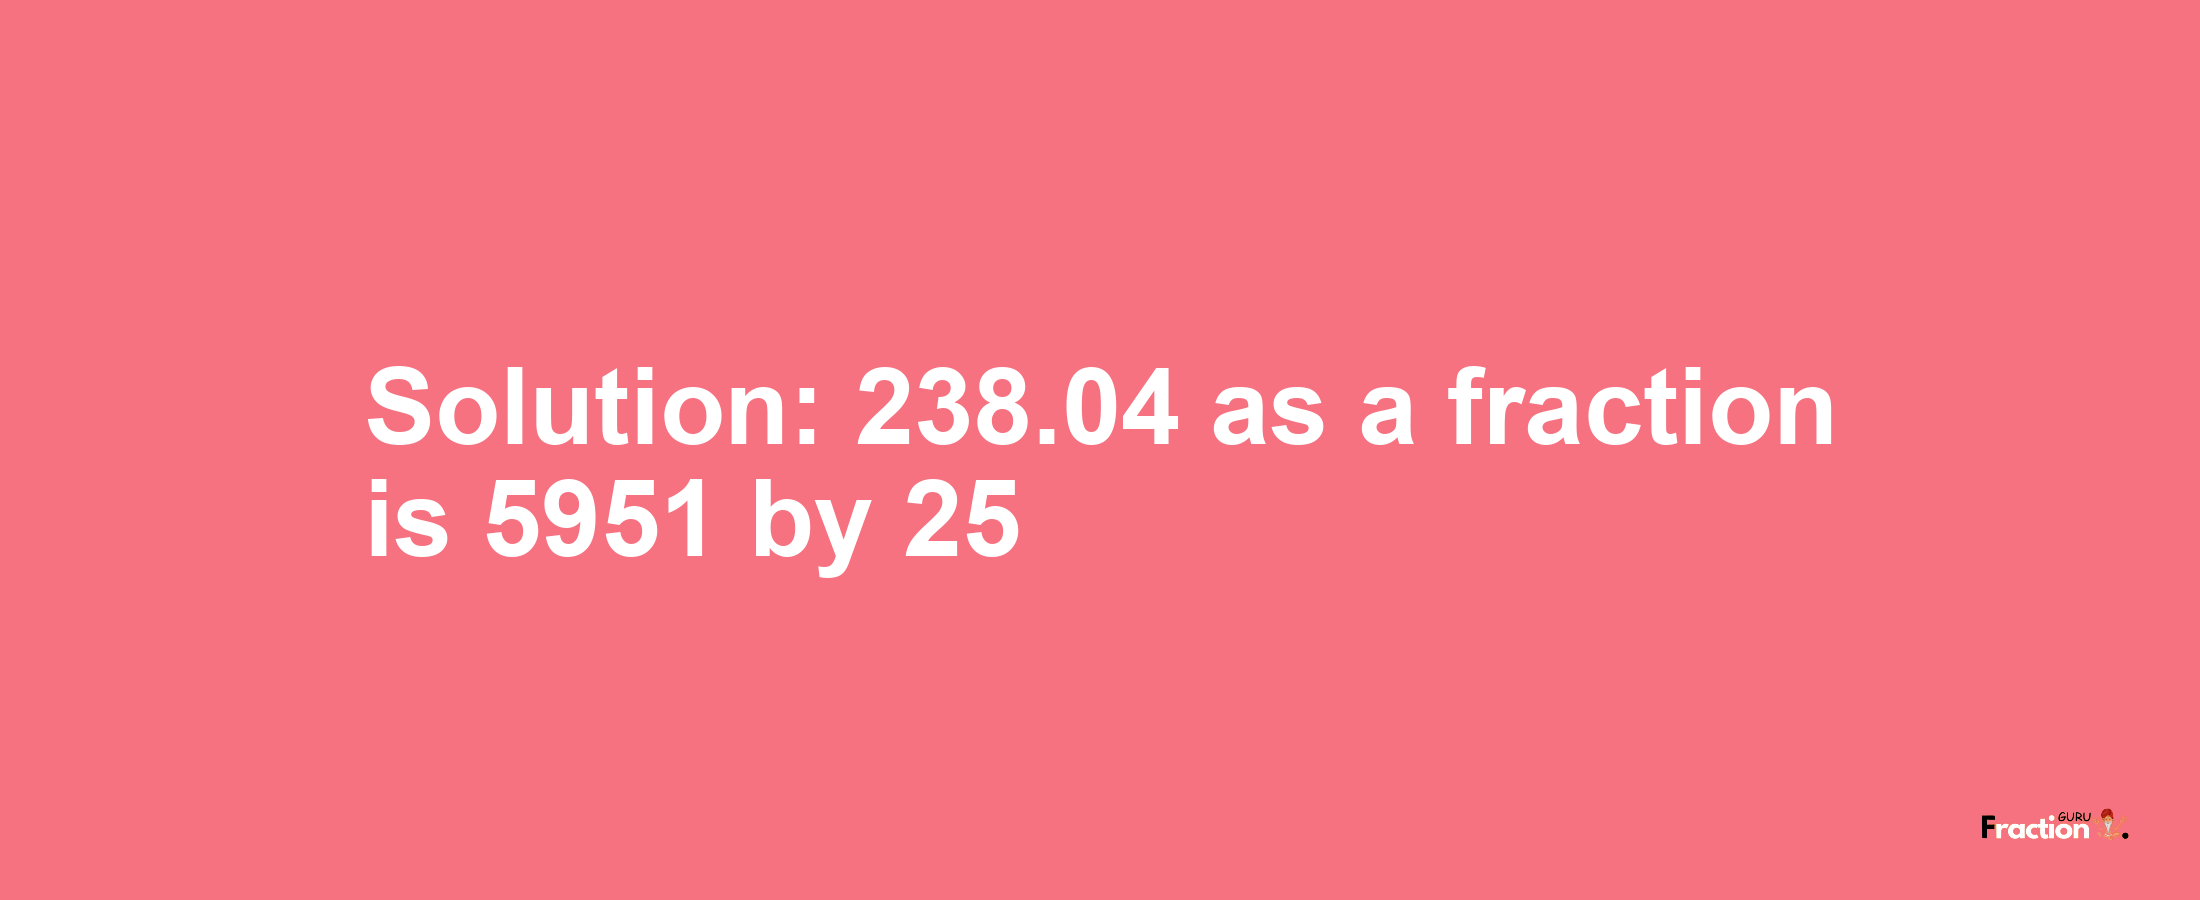 Solution:238.04 as a fraction is 5951/25